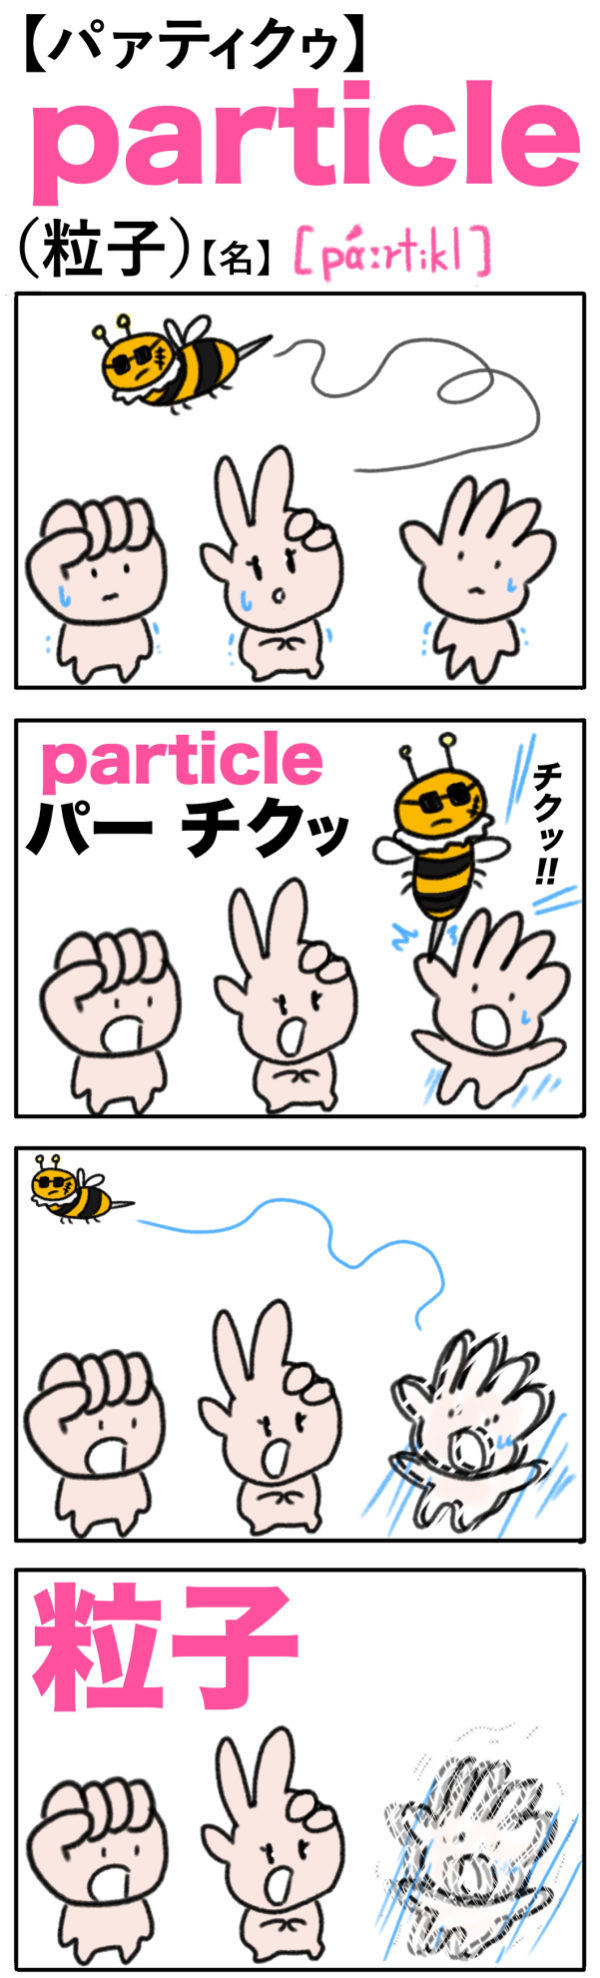 particle（粒子）の語呂合わせ英単語